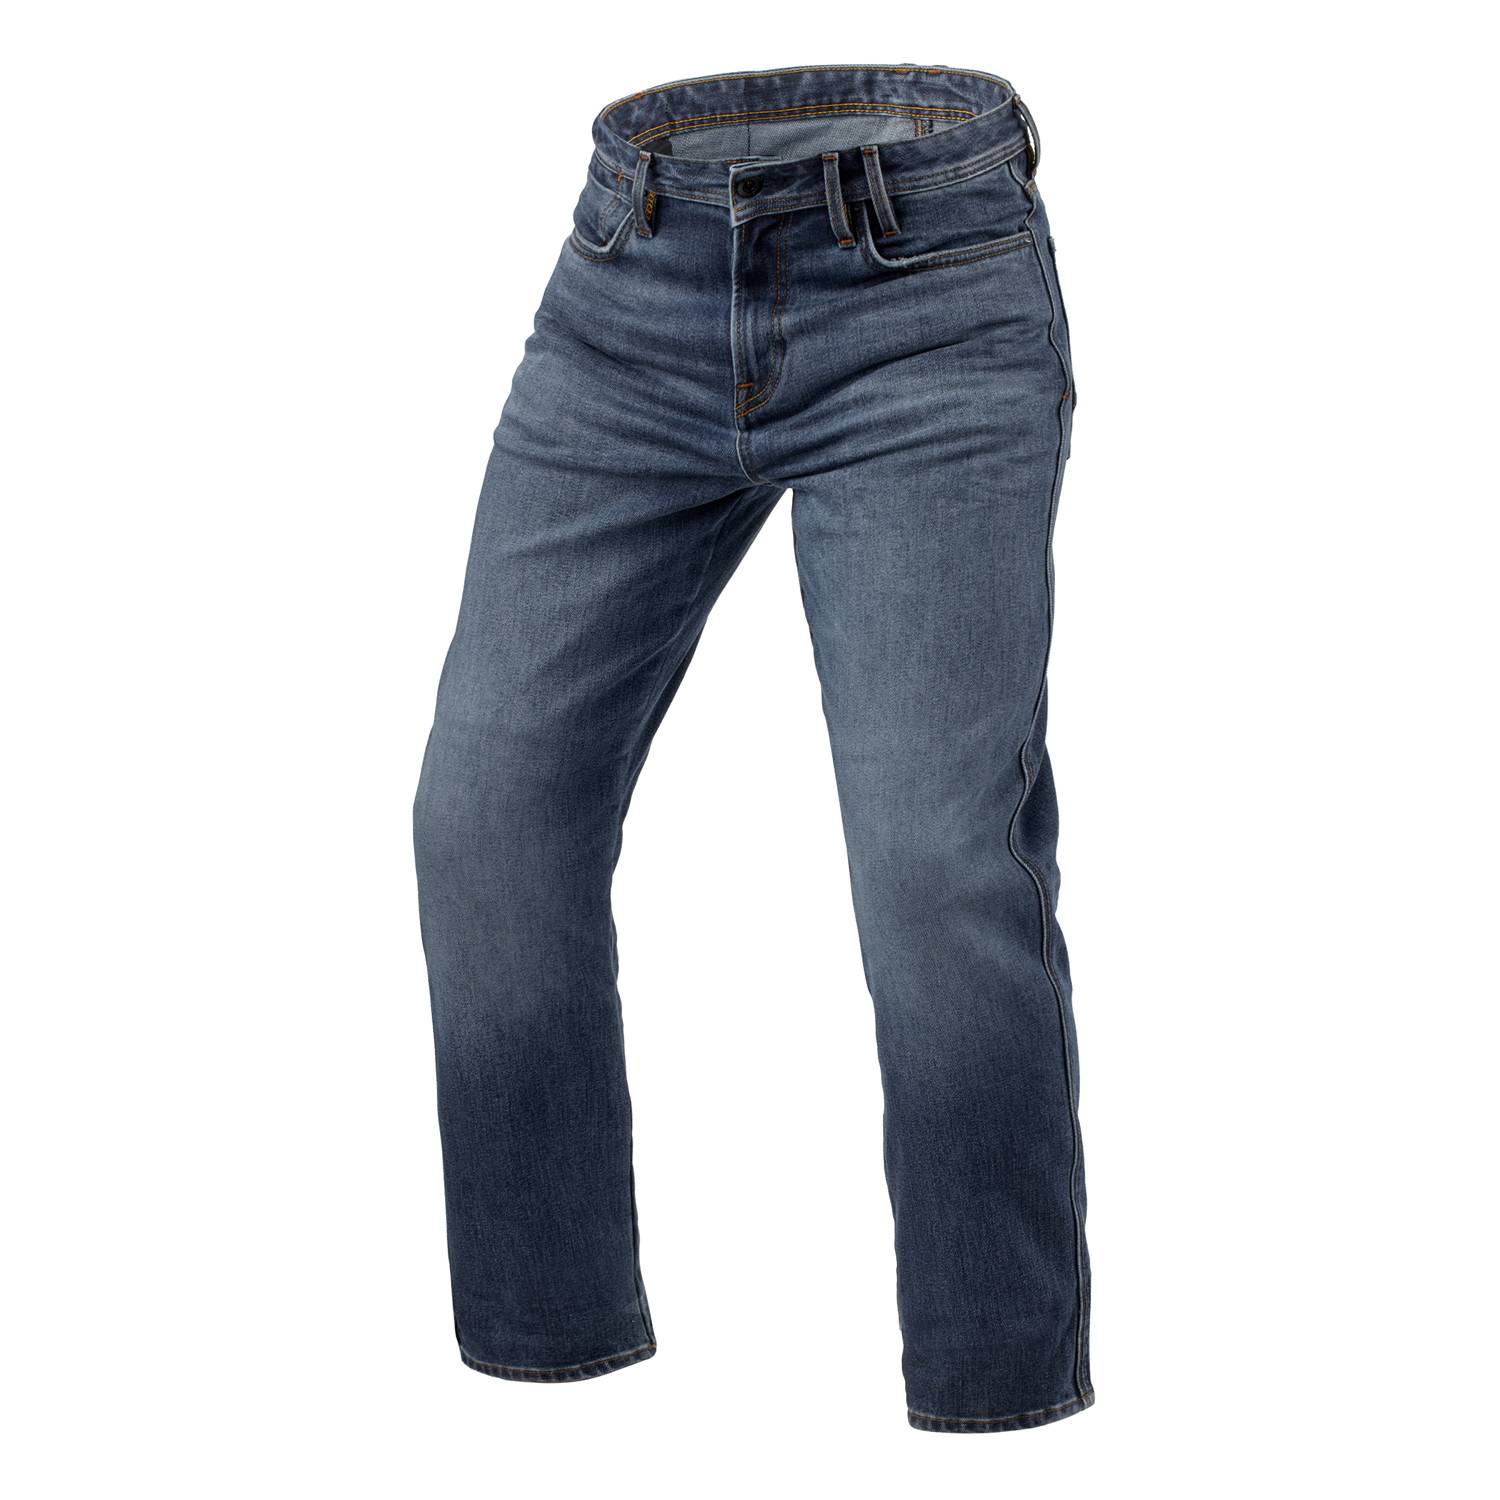 Image of REV'IT! Jeans Lombard 3 RF Medium Blue Stone L34 Motorcycle Jeans Taille L34/W34